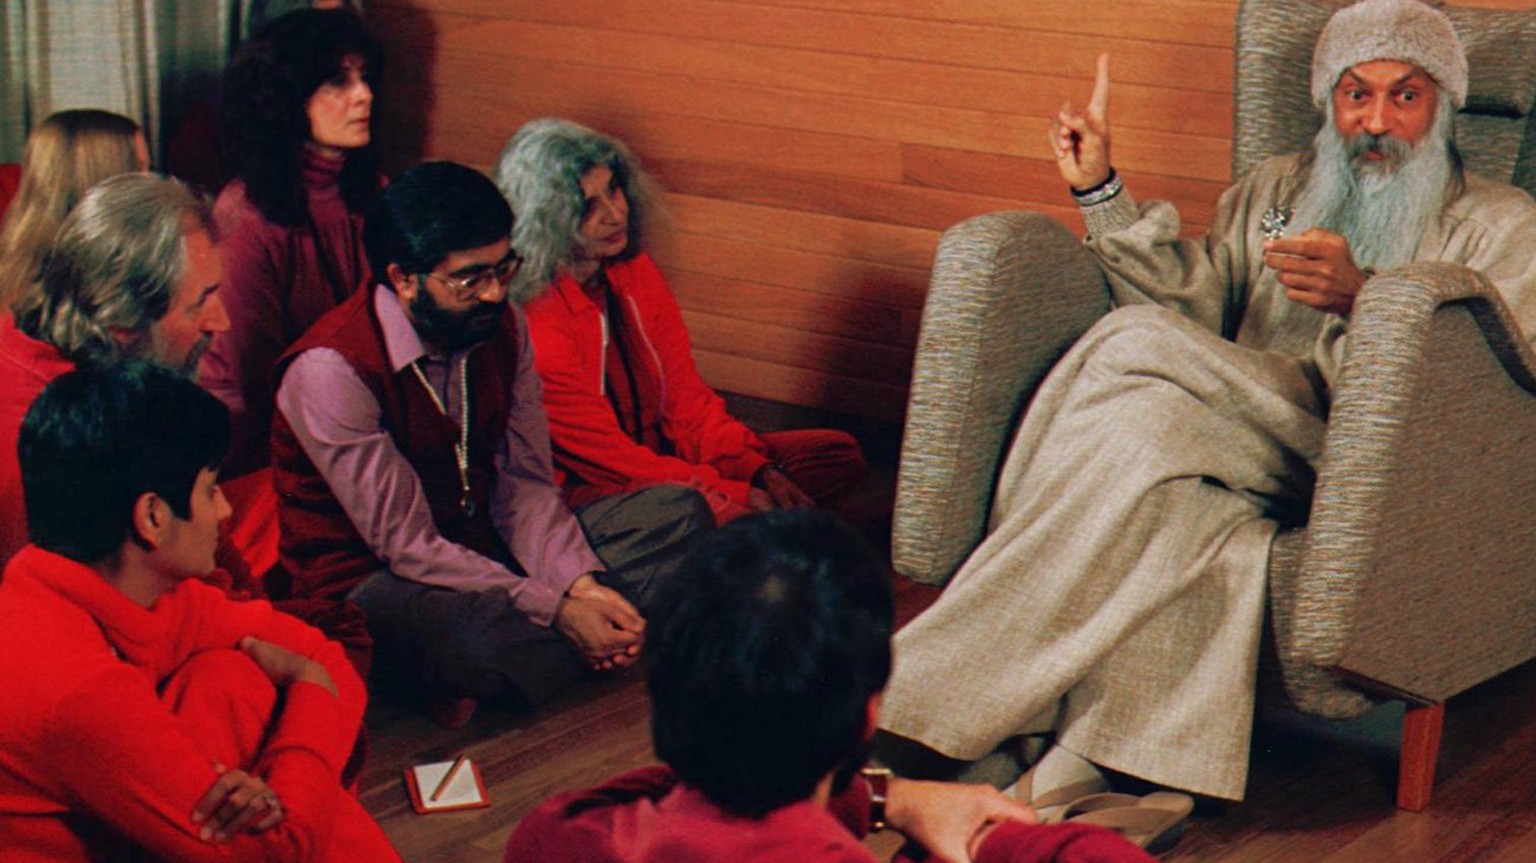 Bhagwan Shree Rajneesh, right, speaks with his disciples in this undated photo in Rajneeshpuram, Ore. Patrons of 10 restaurants in The Dalles, Ore., became ill in Sept. 1984, after being poisoned by m ...